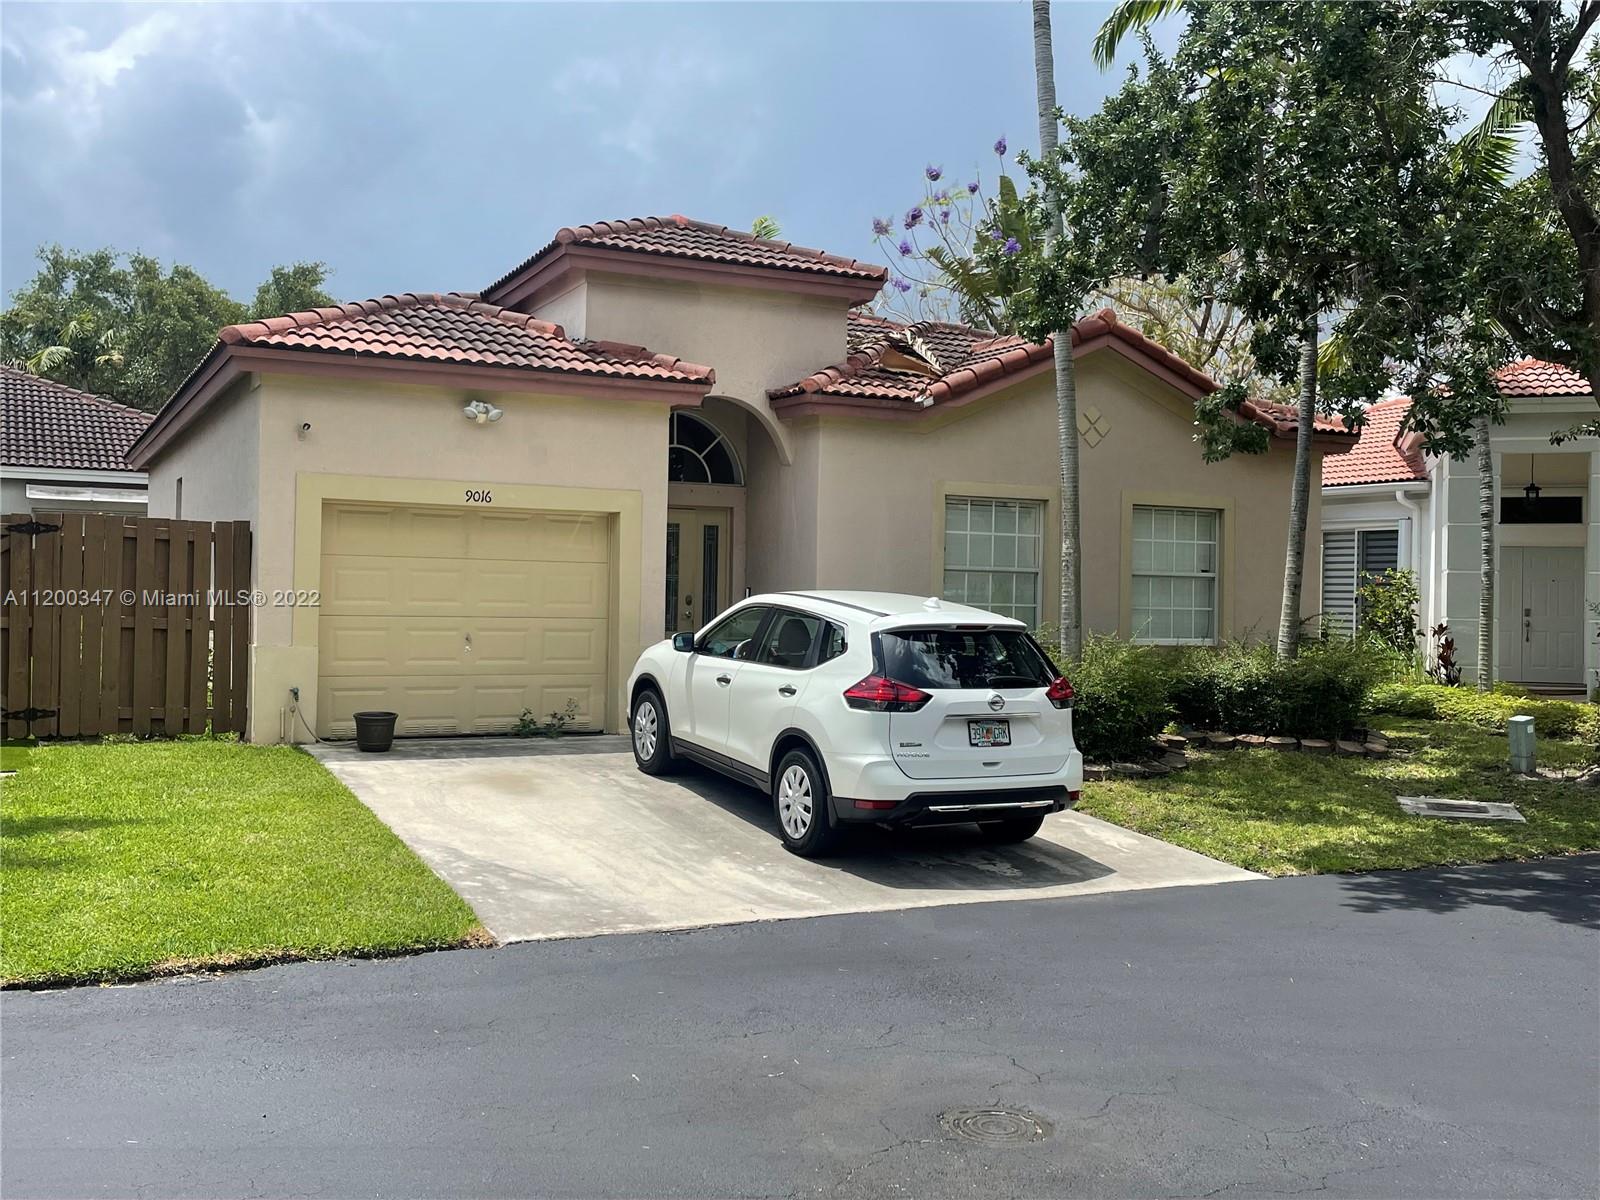 This 3 bedroom 2 bathroom 1 car garage single family home in beautiful Cutler Bay is a can't miss!!! Community pool for you to enjoy with your kids, nicely maintained with low association fees. The property has two associations one for $118 quarterly and the other for $95 a month. For showings please contact the listing agent.